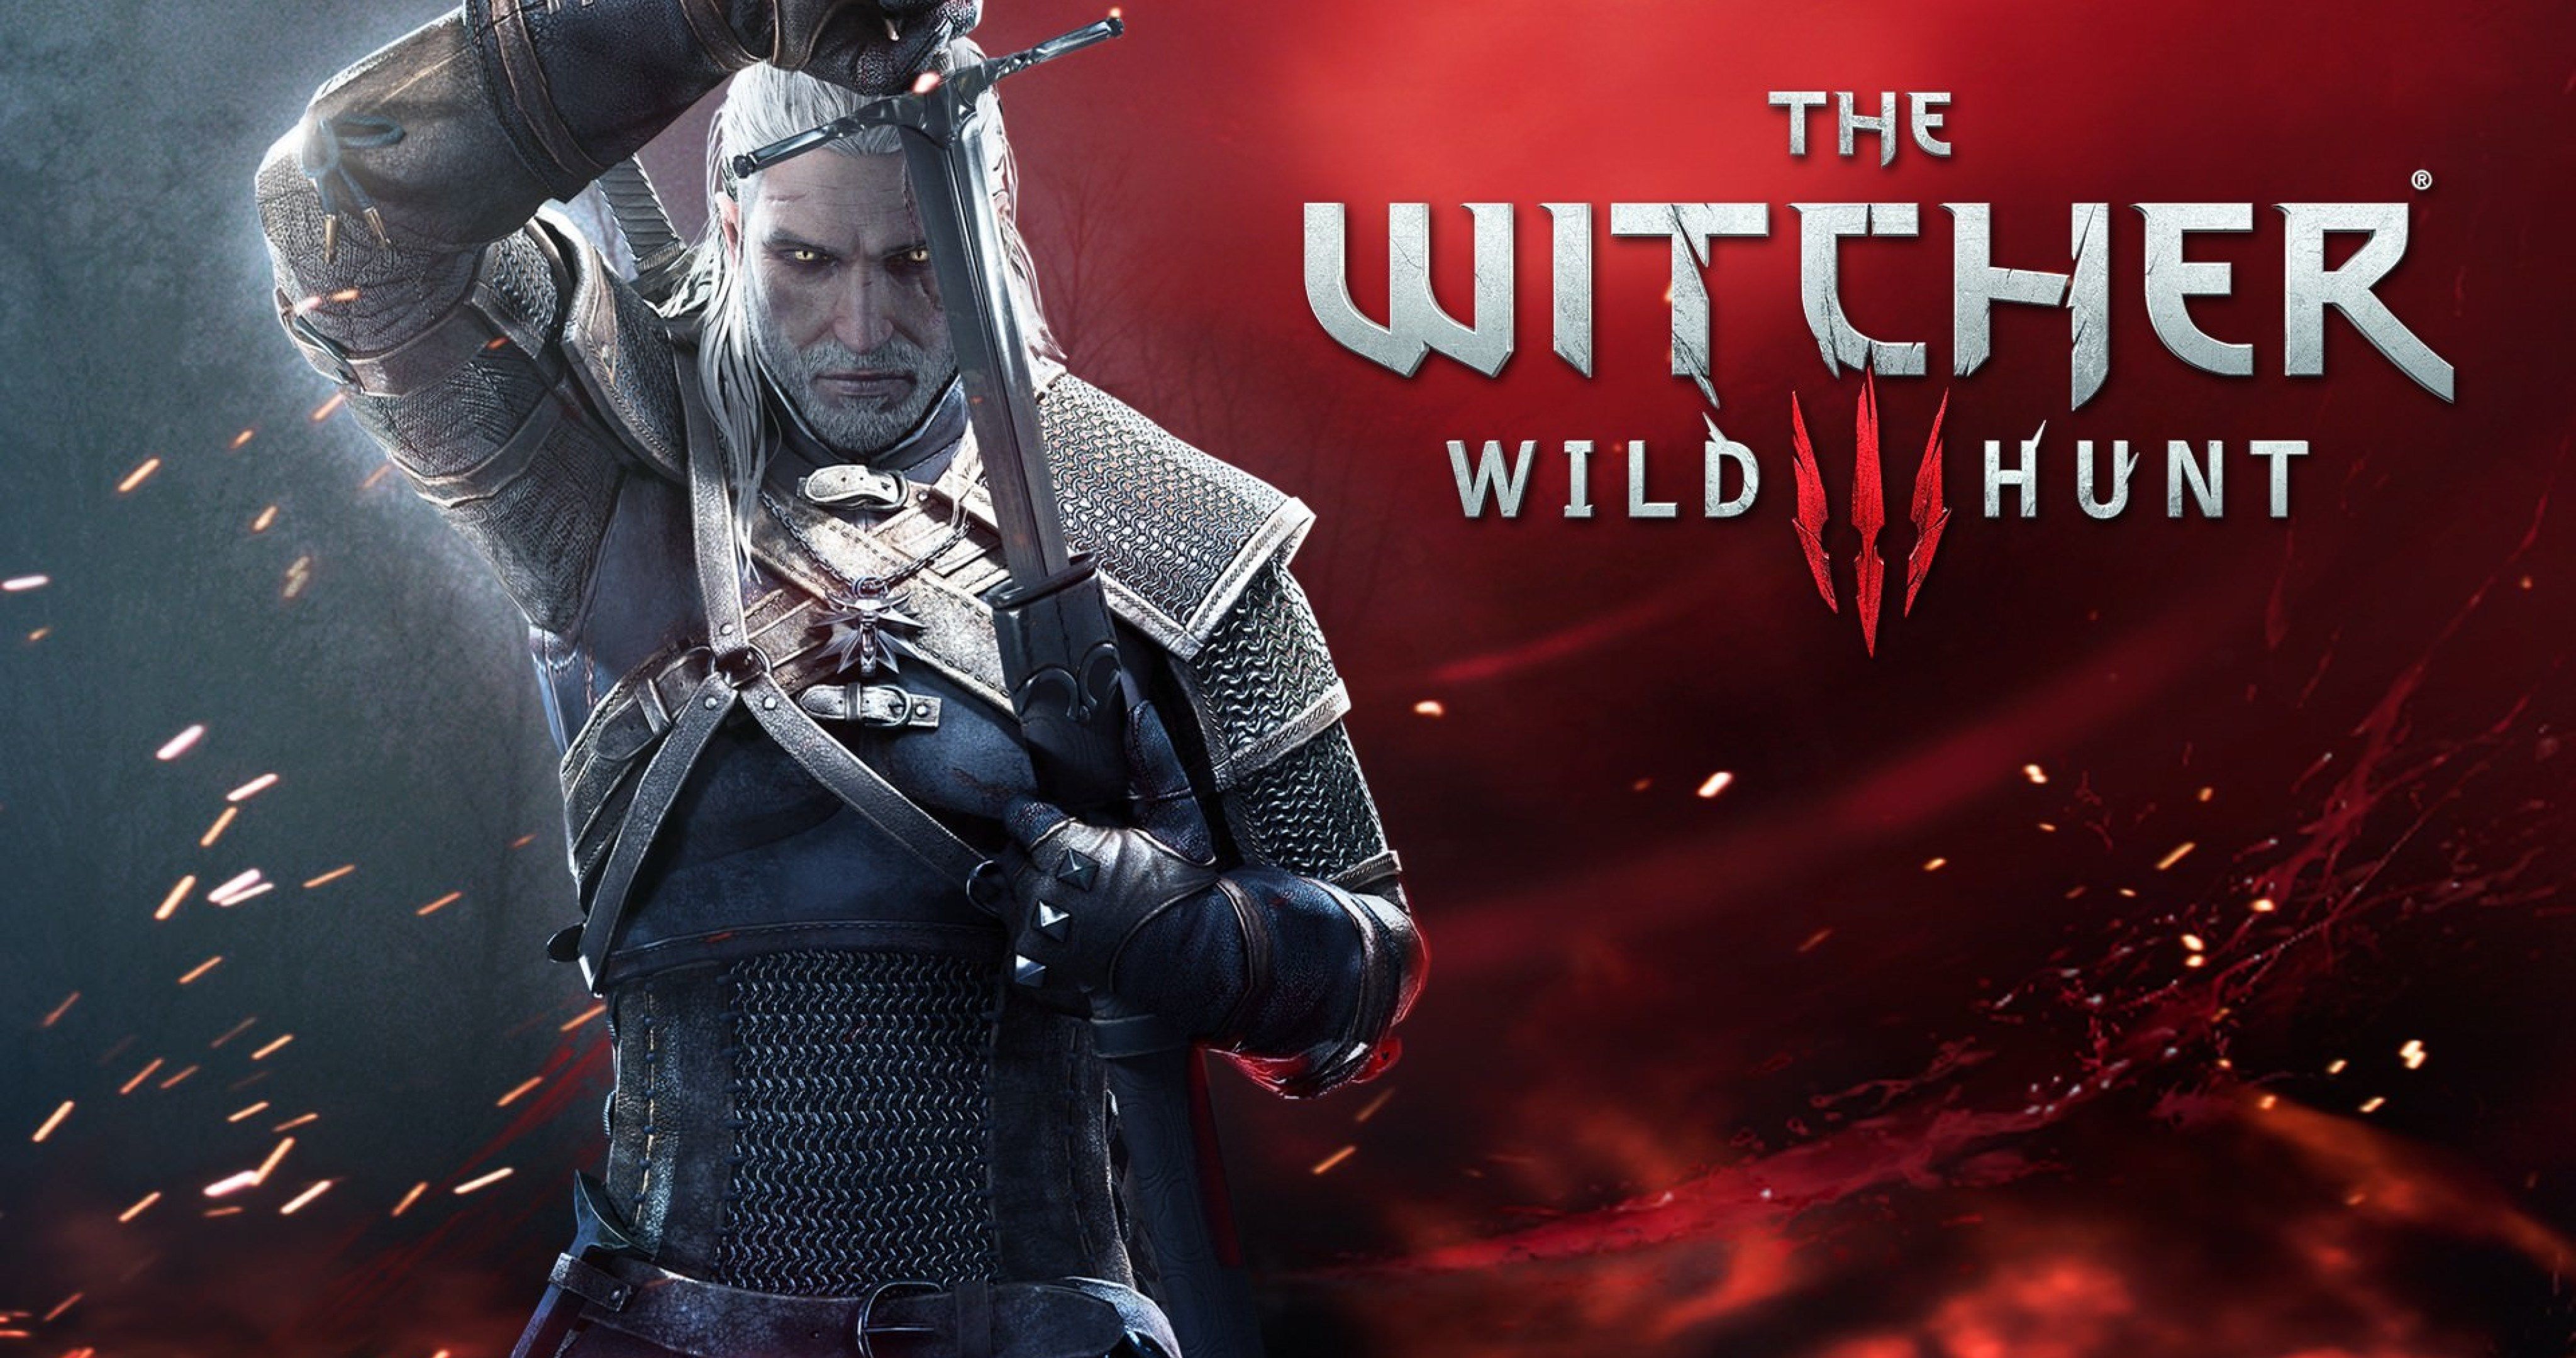 The Witcher 1920X1080 Wallpapers on WallpaperDog